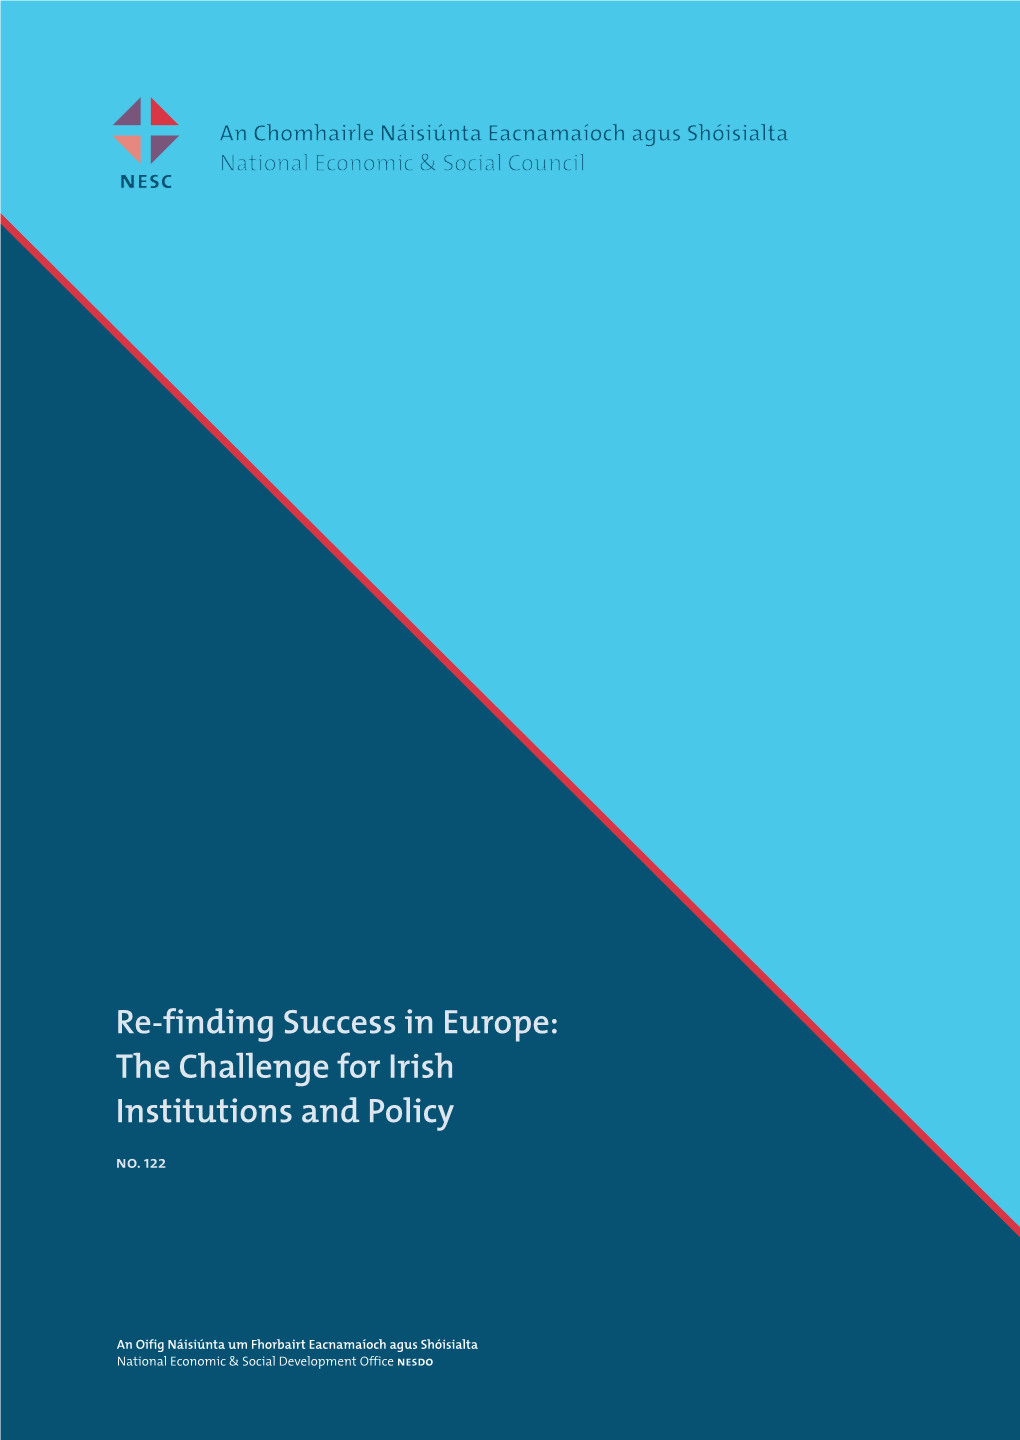 Re-Finding Success in Europe: the Challenge for Irish Institutions and Policy and Institutions Irish for Challenge the Europe: in Success Re-Finding